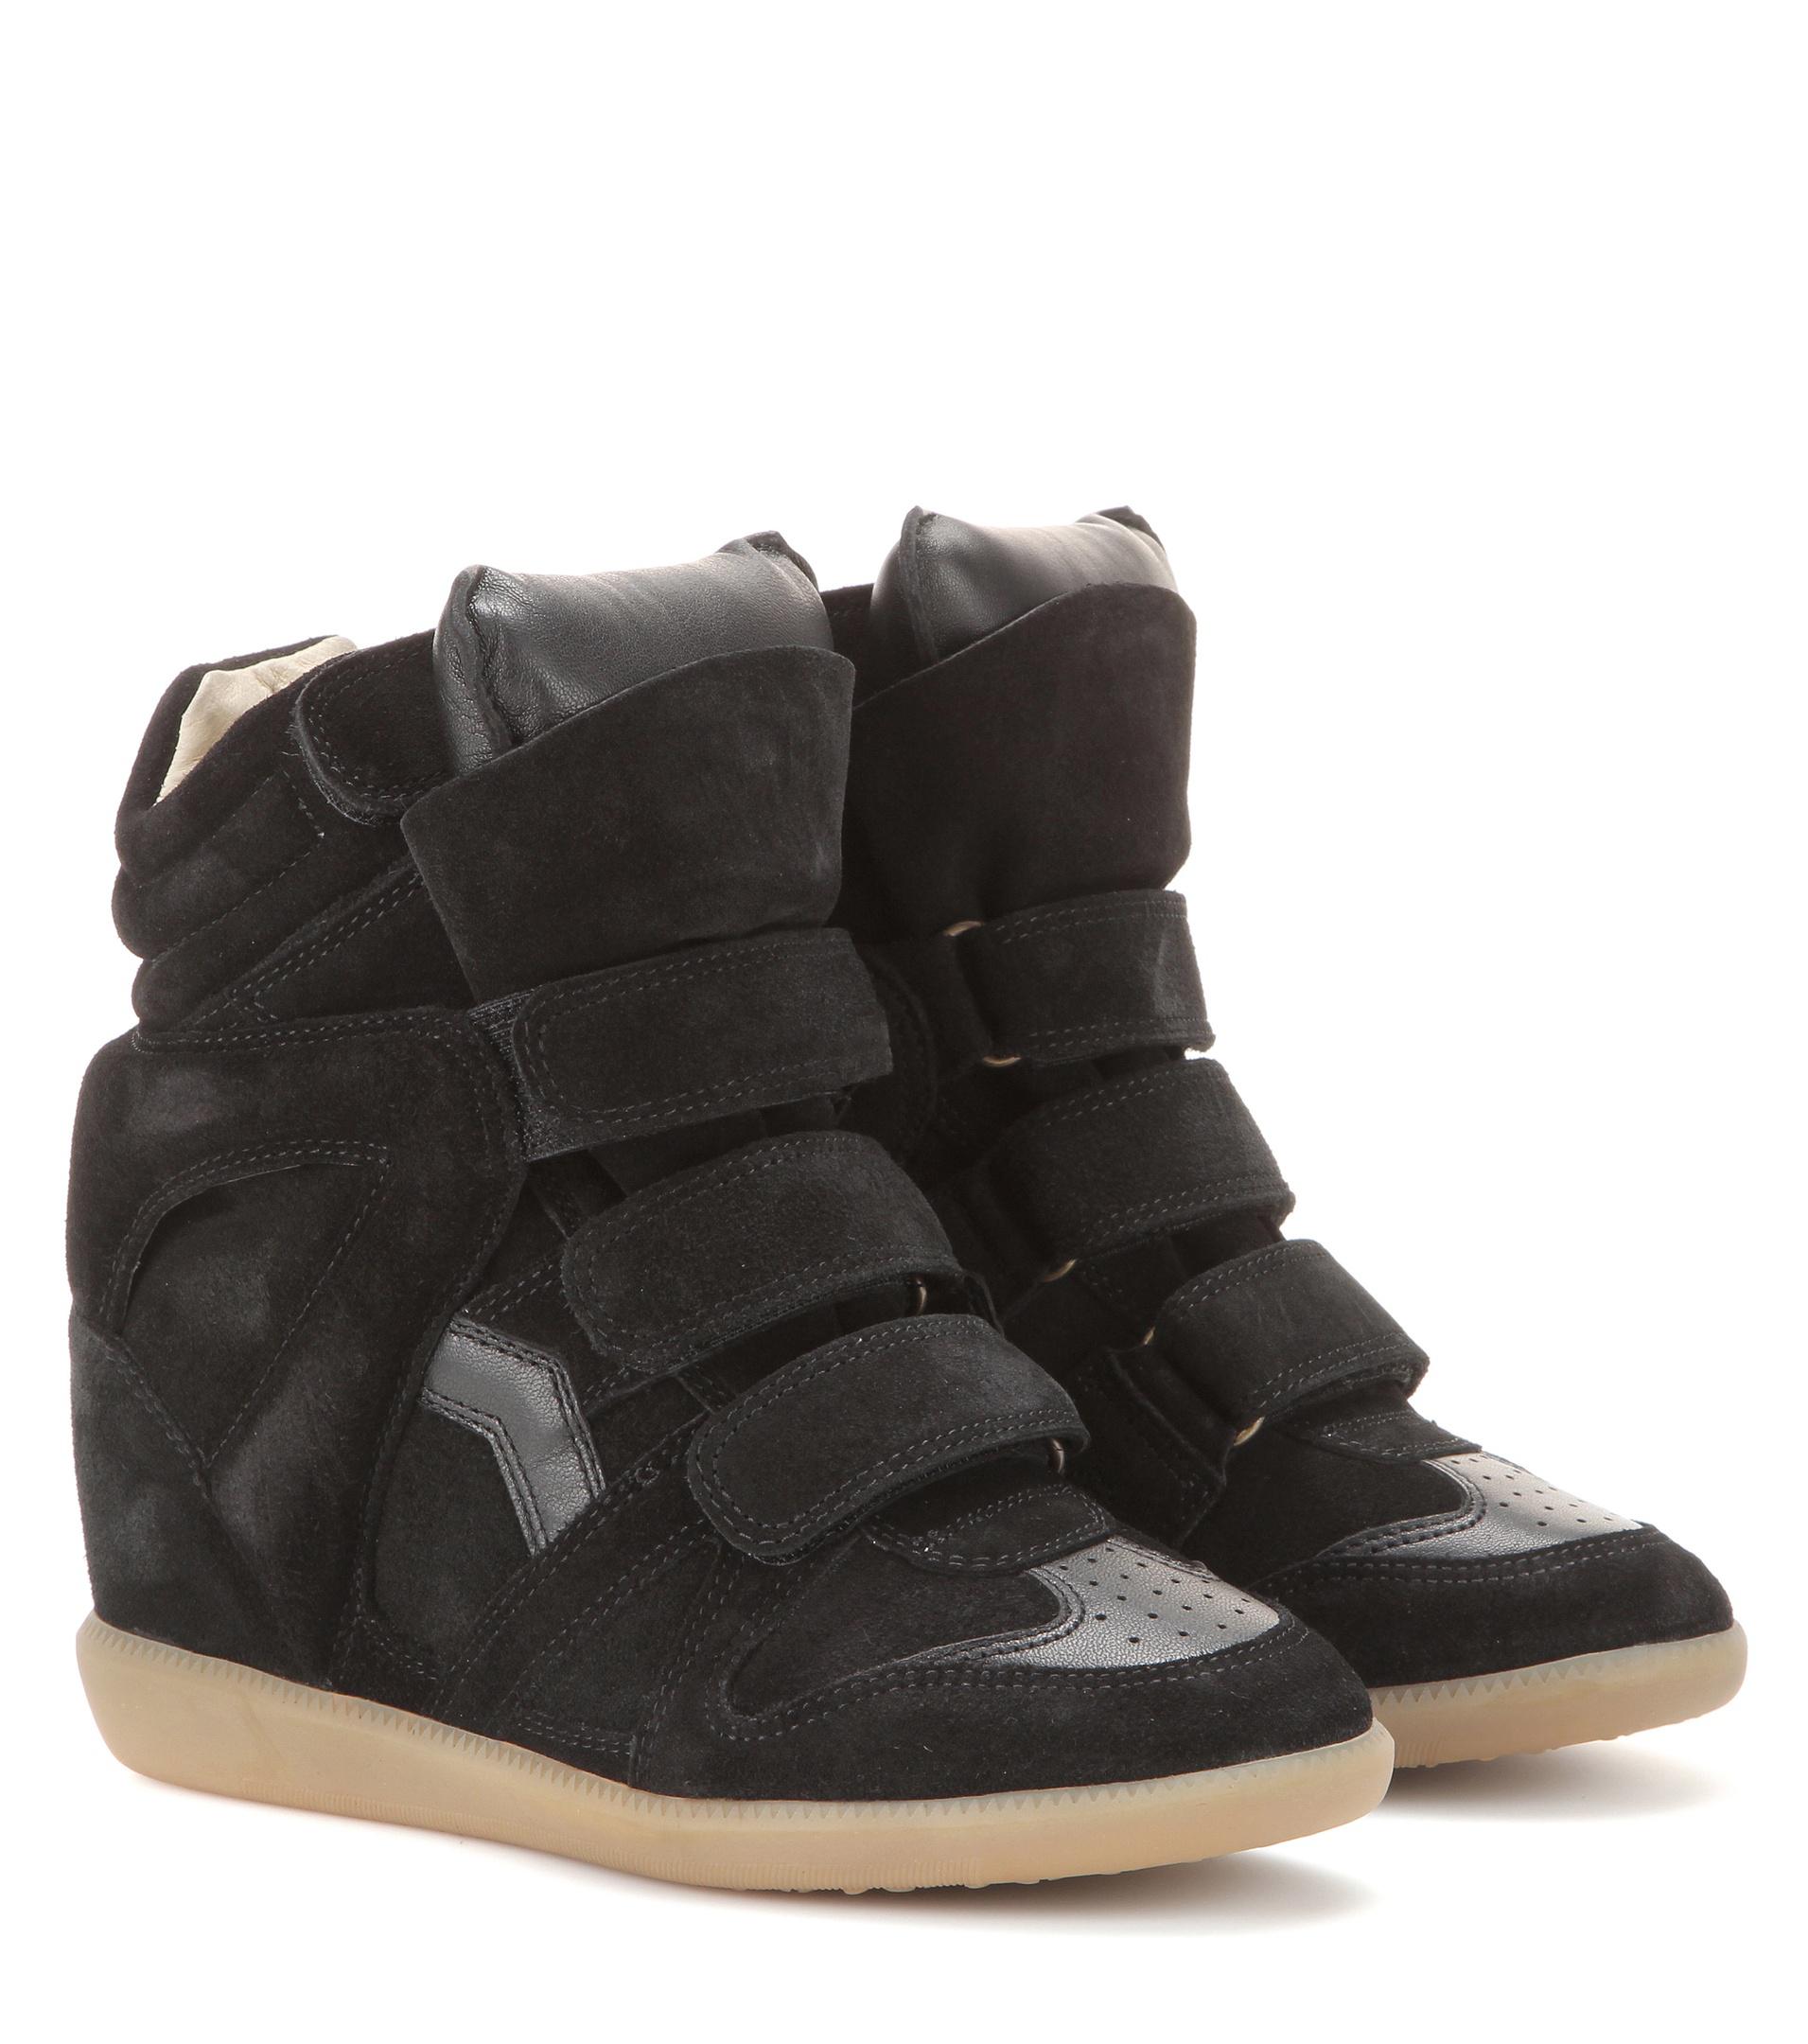 Lyst - Isabel Marant Bekett Leather And Suede Sneakers in Black - Save 53%